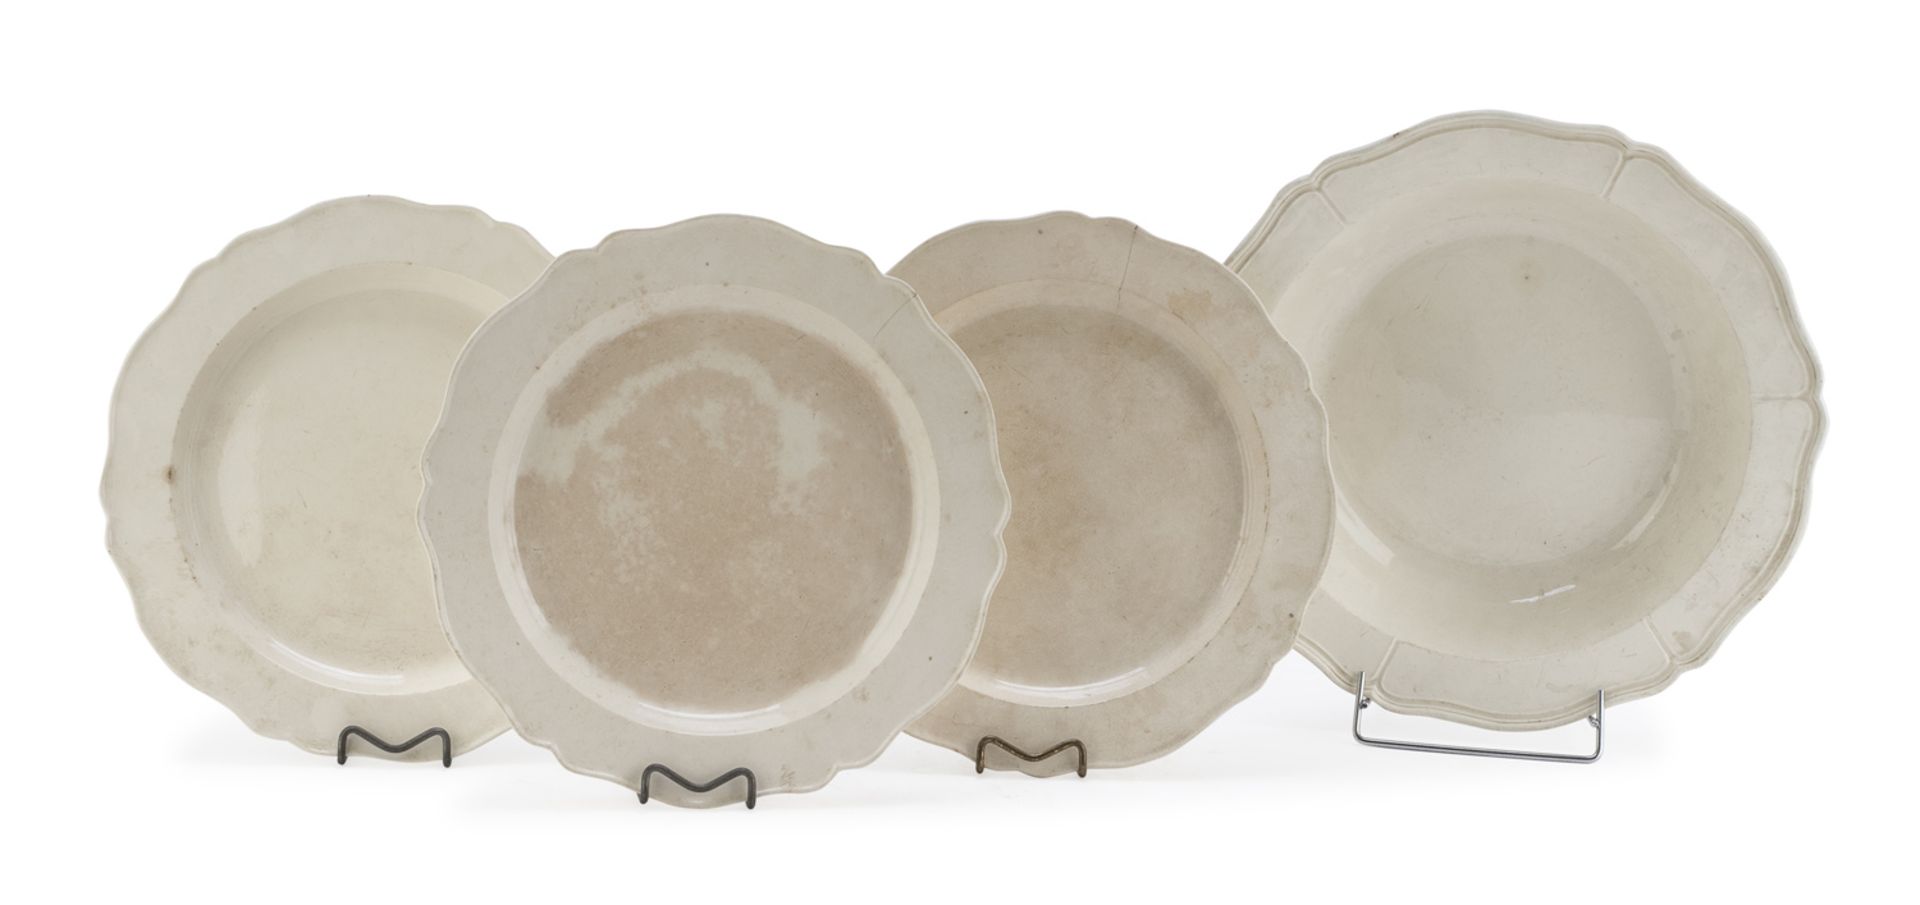 BOWL AND THREE SERVING DISHES IN EARTHENWARE PROBABLY NAPLES 19TH CENTURY